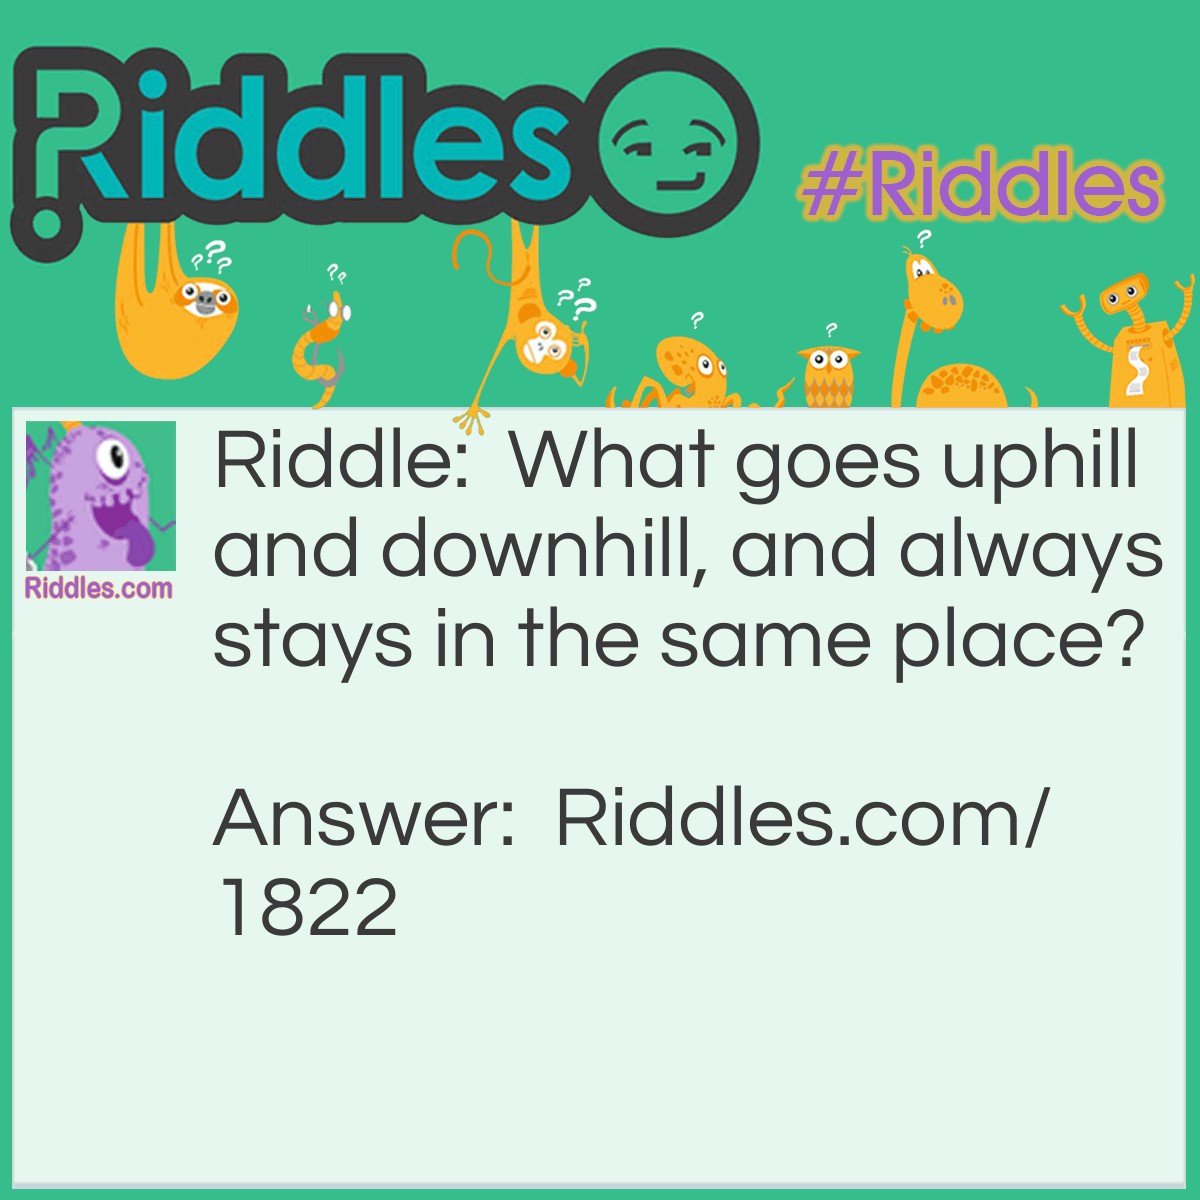 Riddle: What goes uphill and downhill, and always stays in the same place? Answer: A road.